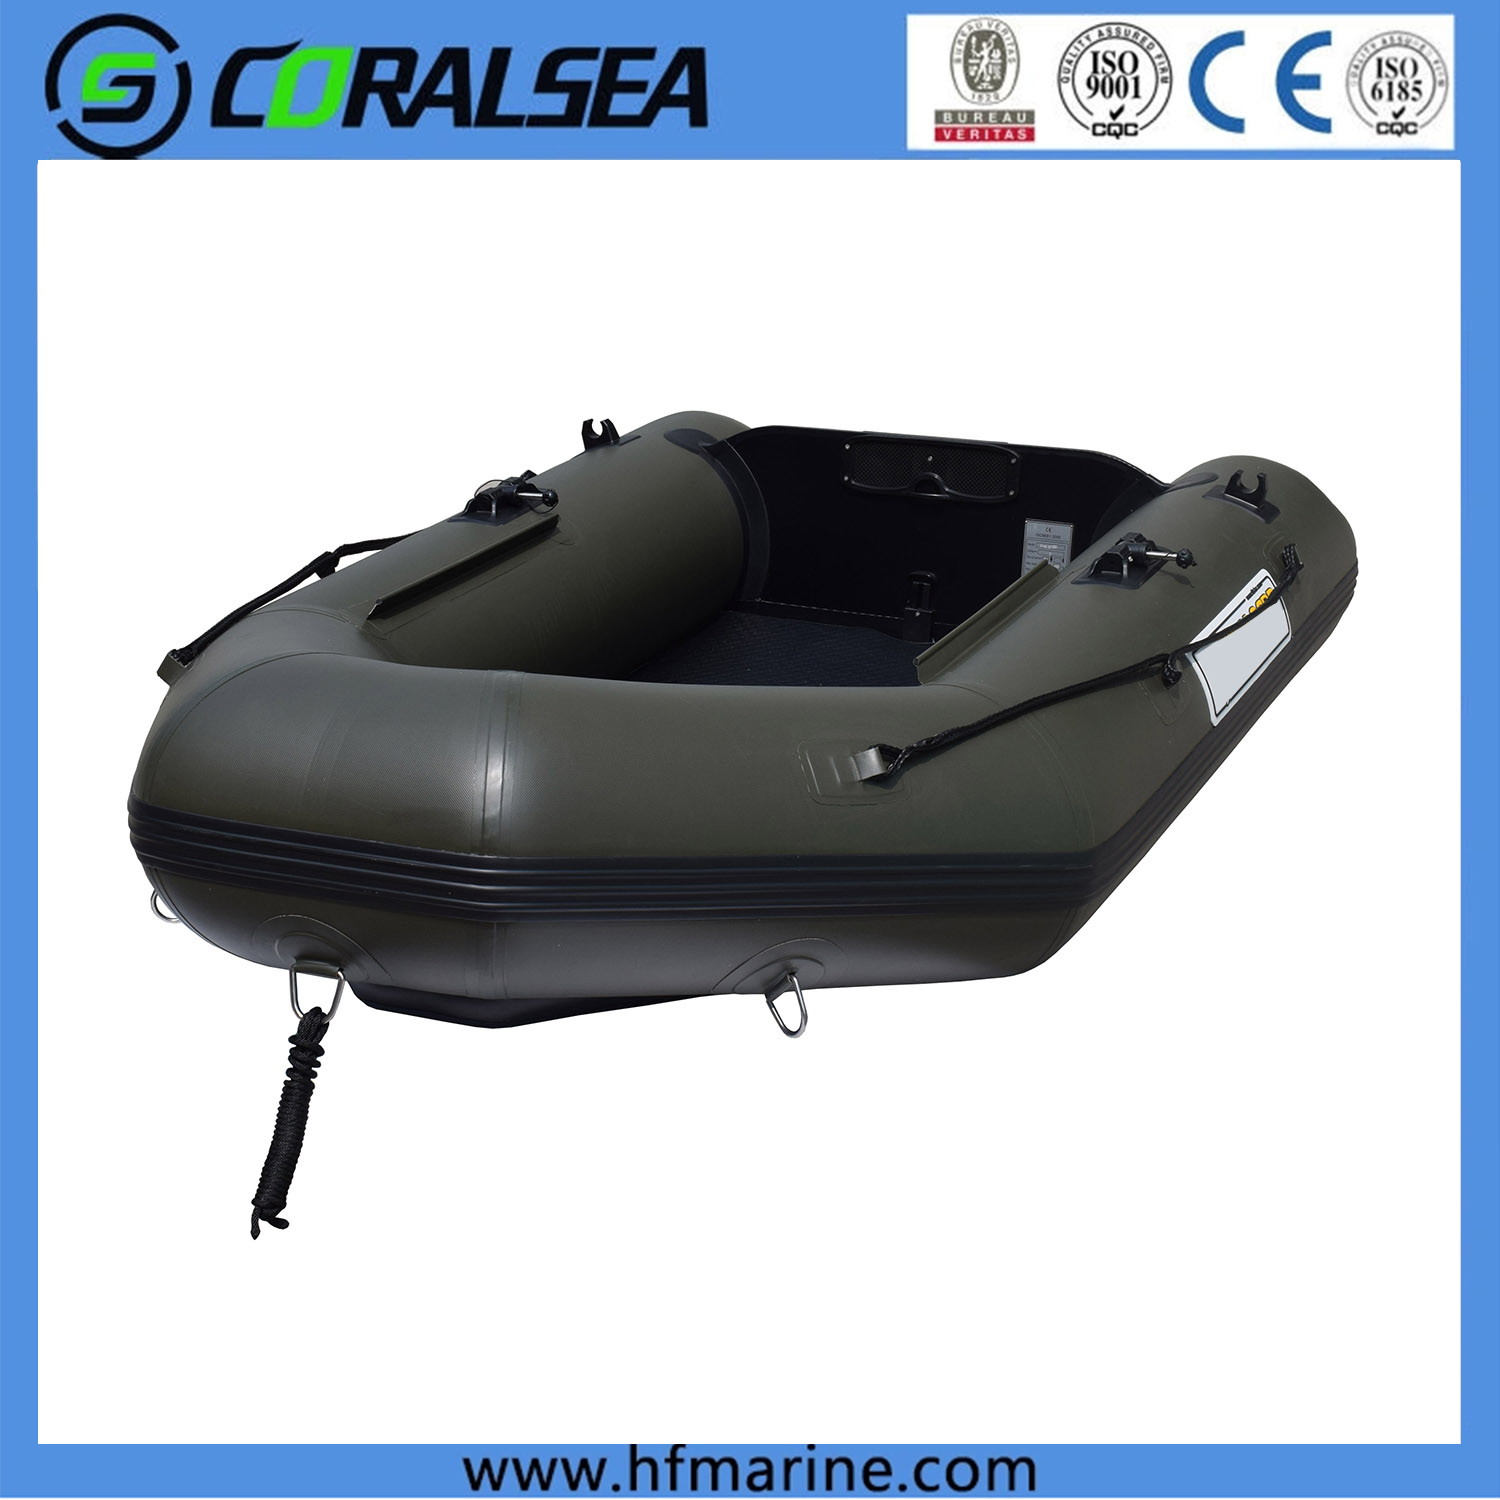 Wholesale China Foldable Dinghy Manufacturer – Ultra-compact